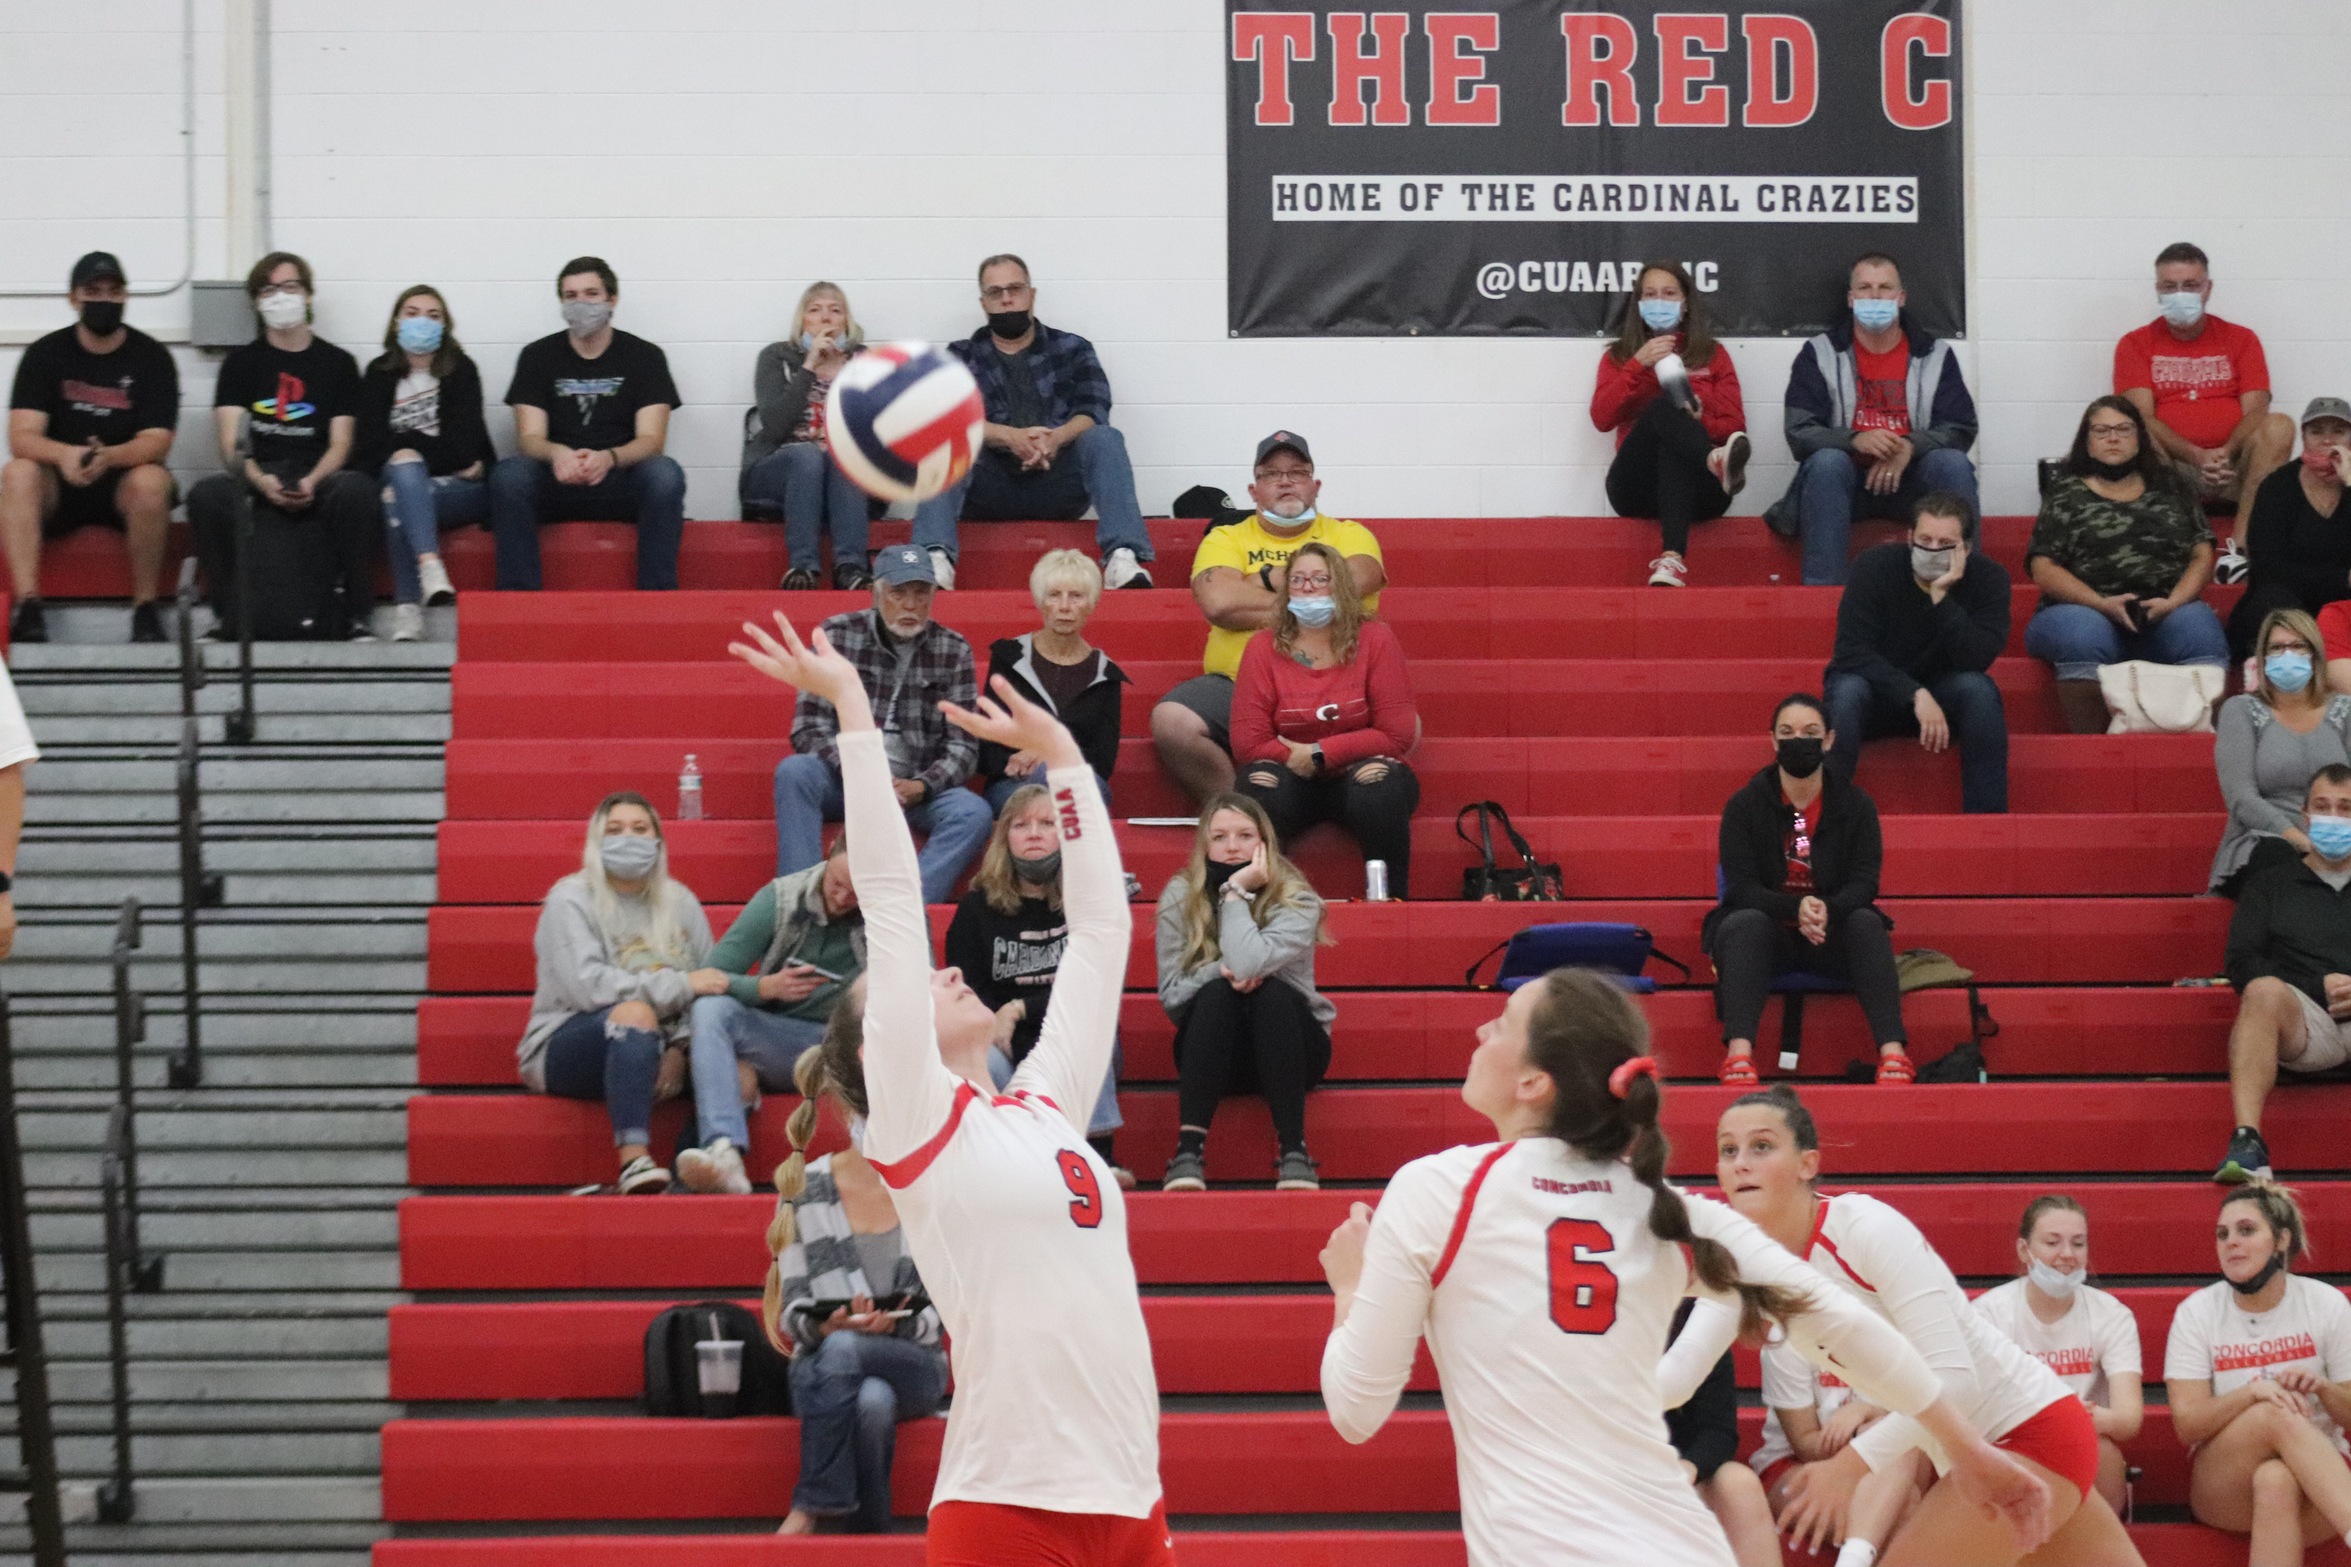 Cardinals battle back from 2 set deficit to take down the Gray Wolves